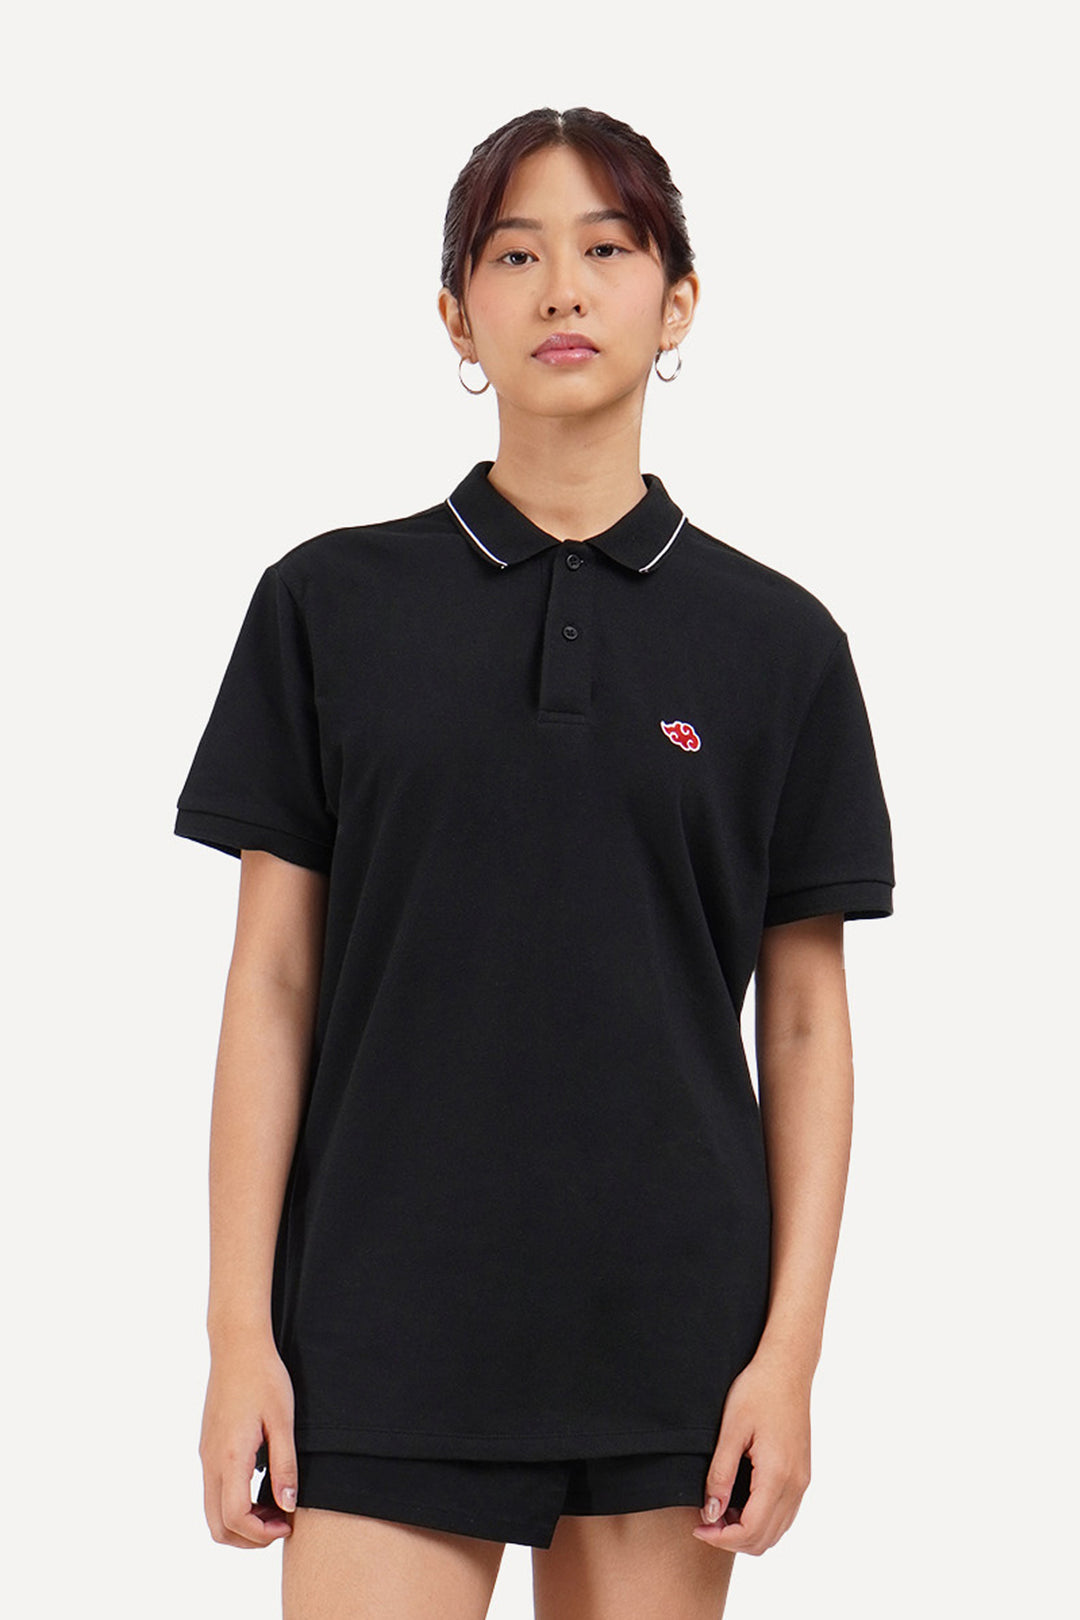 Unisex Embroidered Polo